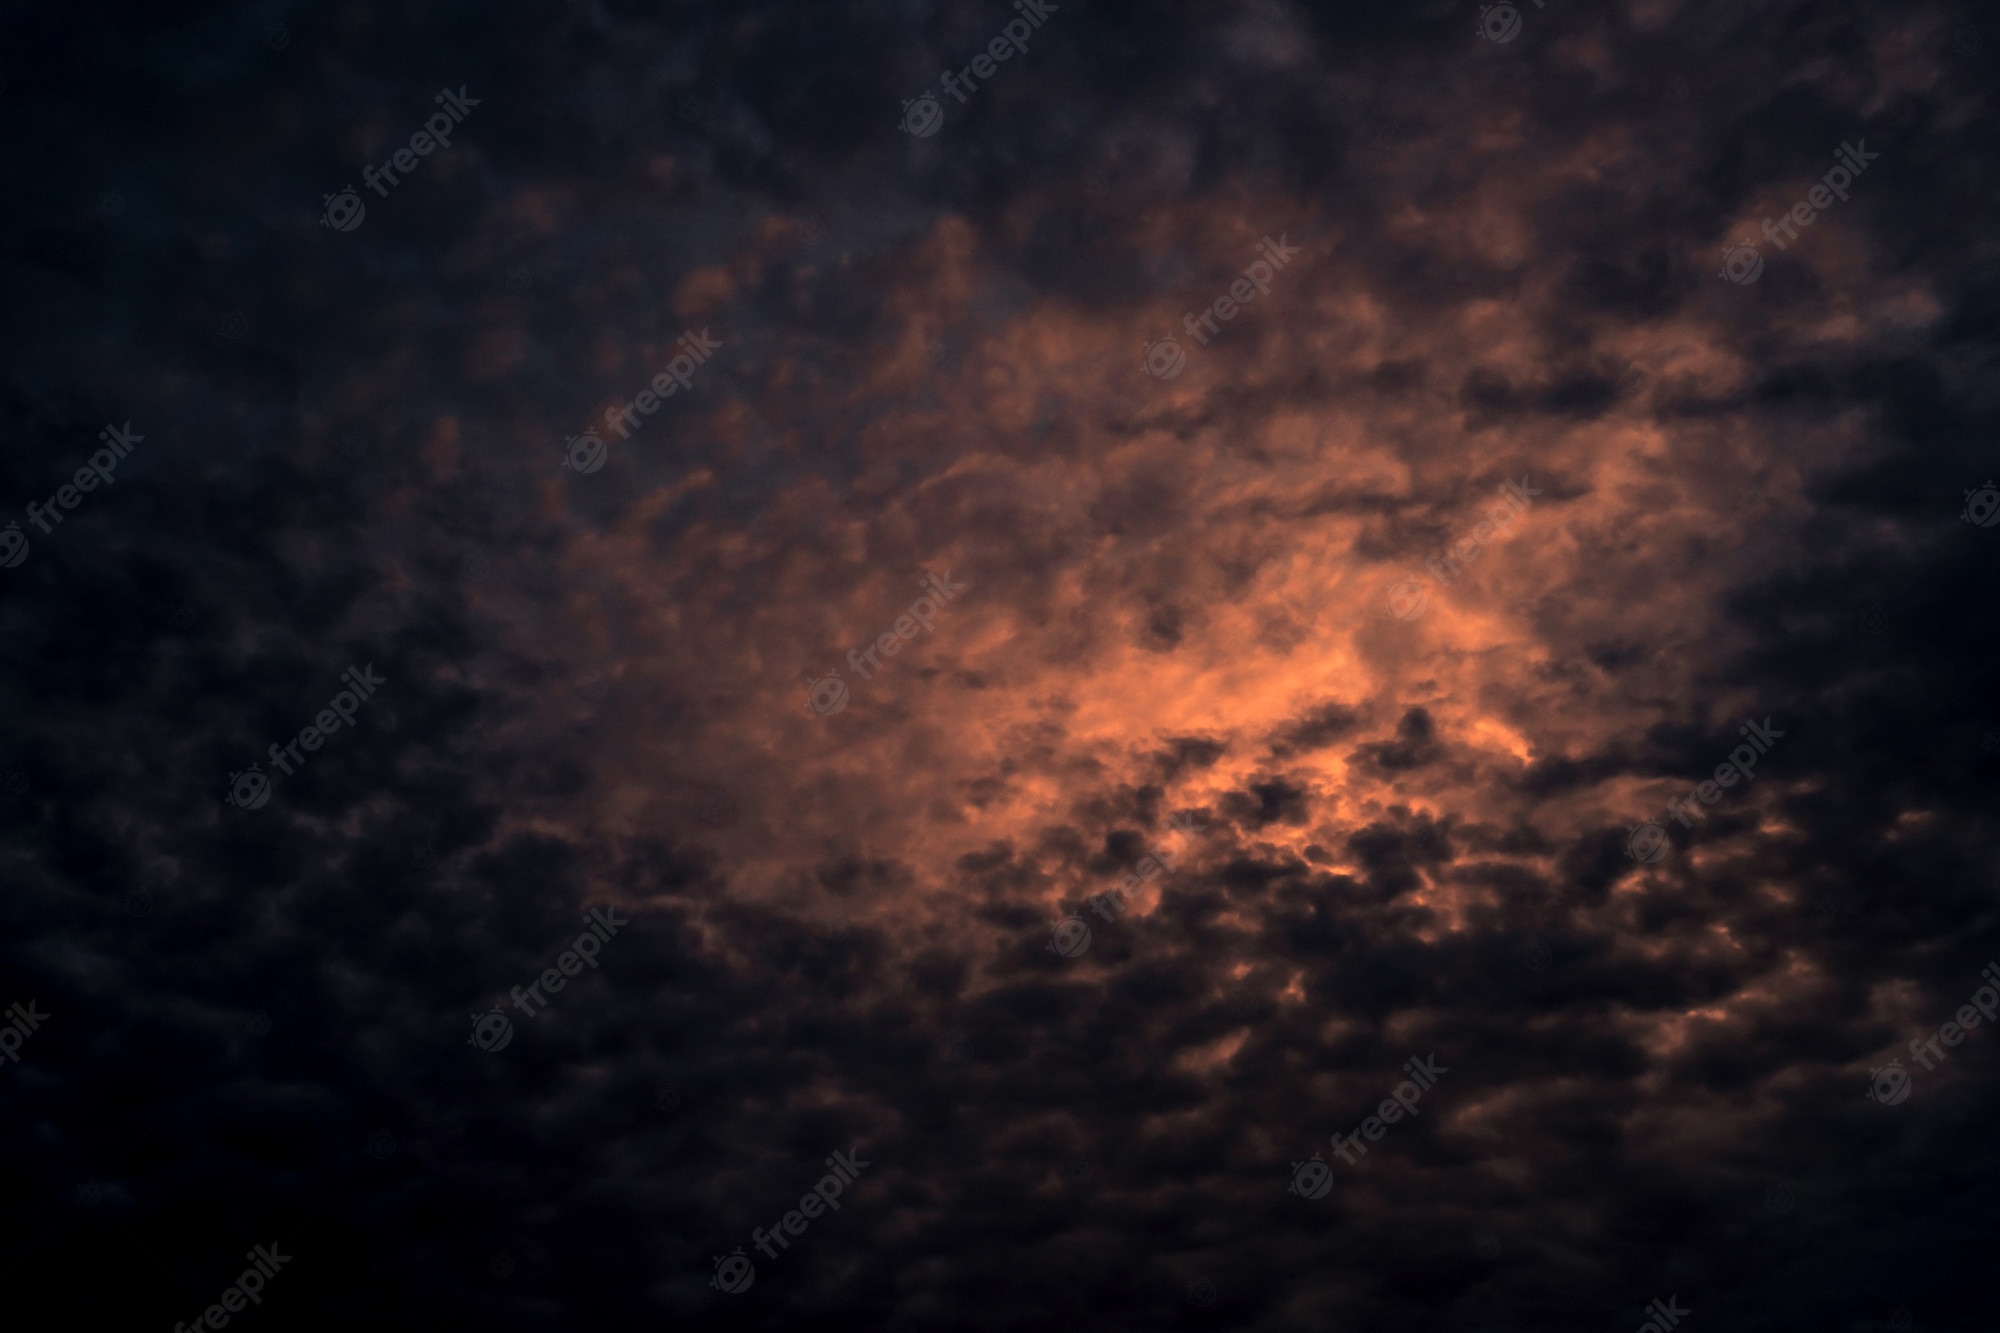 Dusky Cloudy Sunset Wallpapers